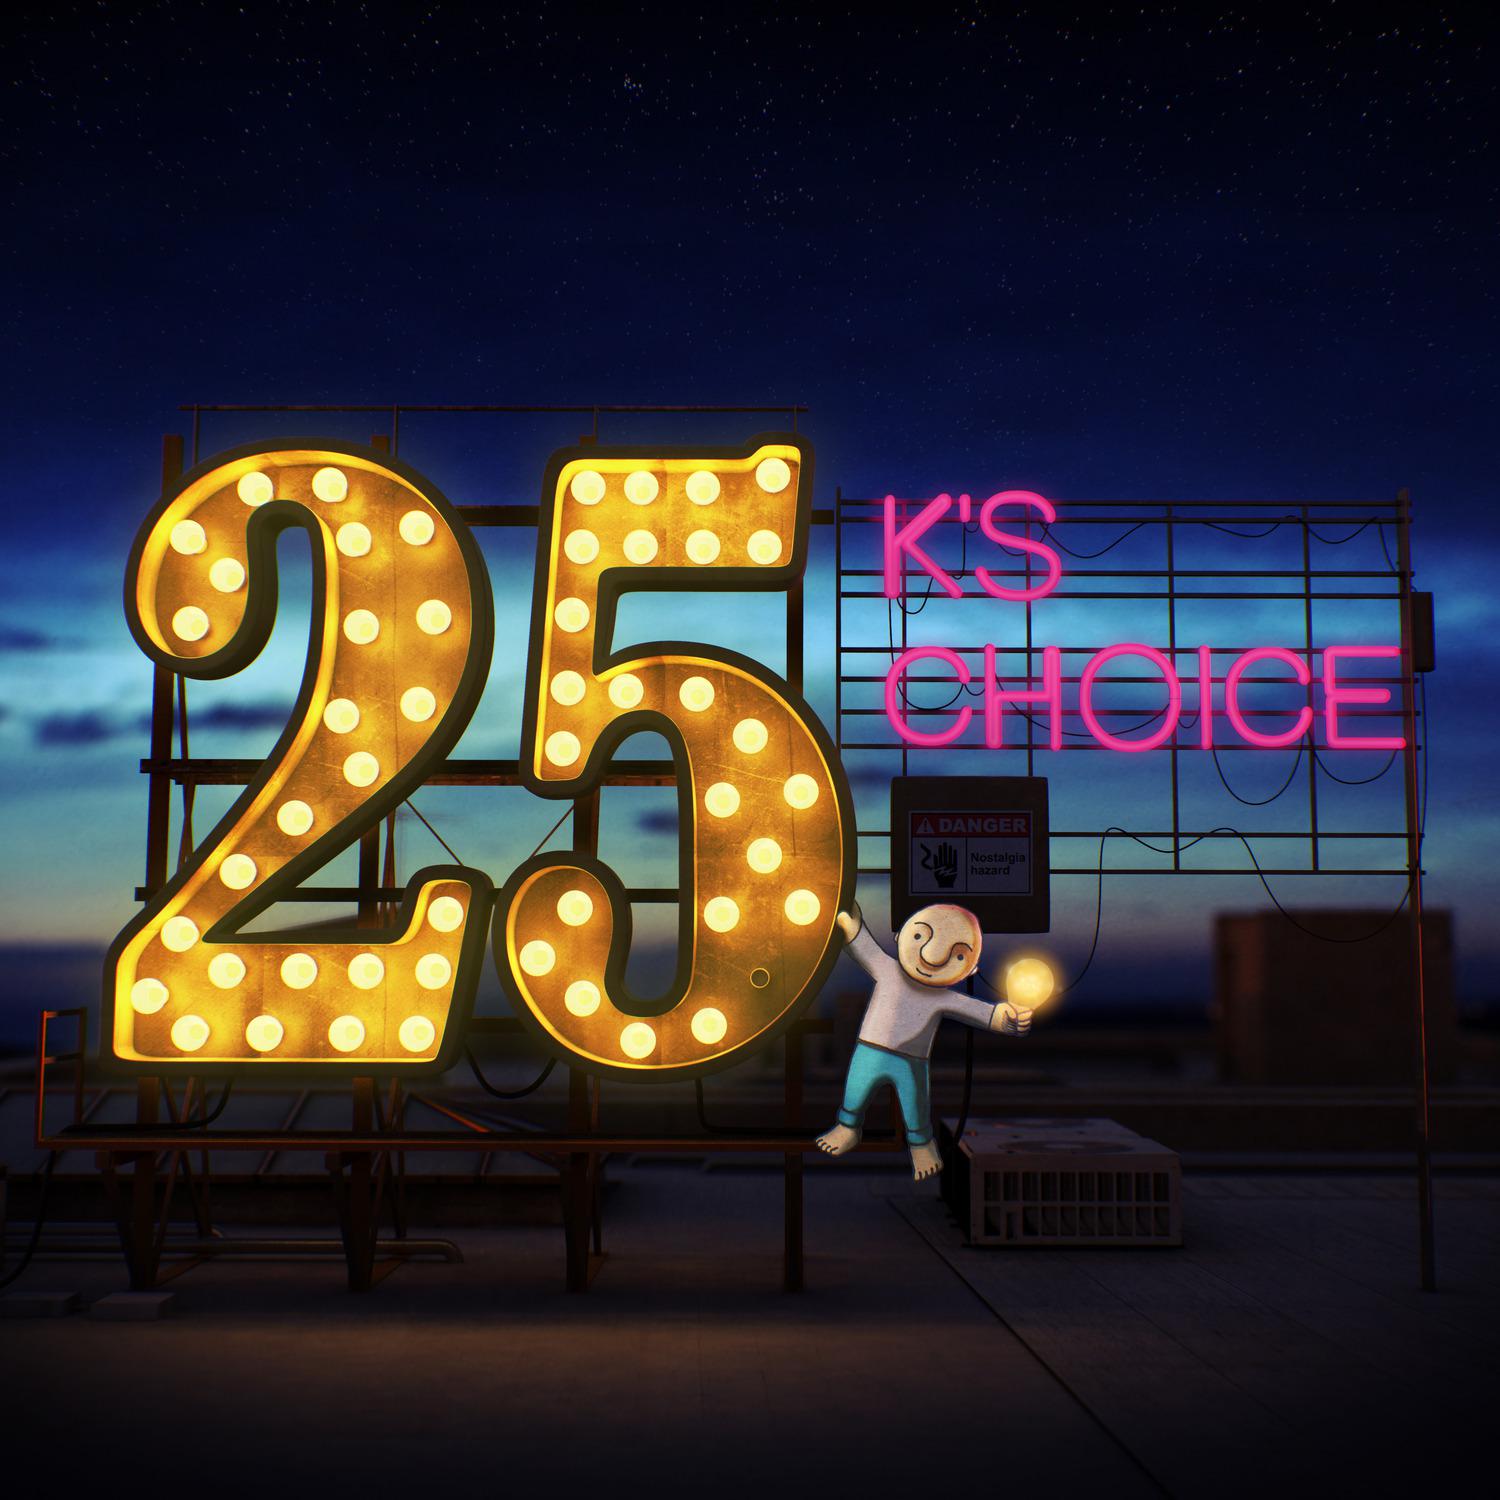 K's Choice - Another Year